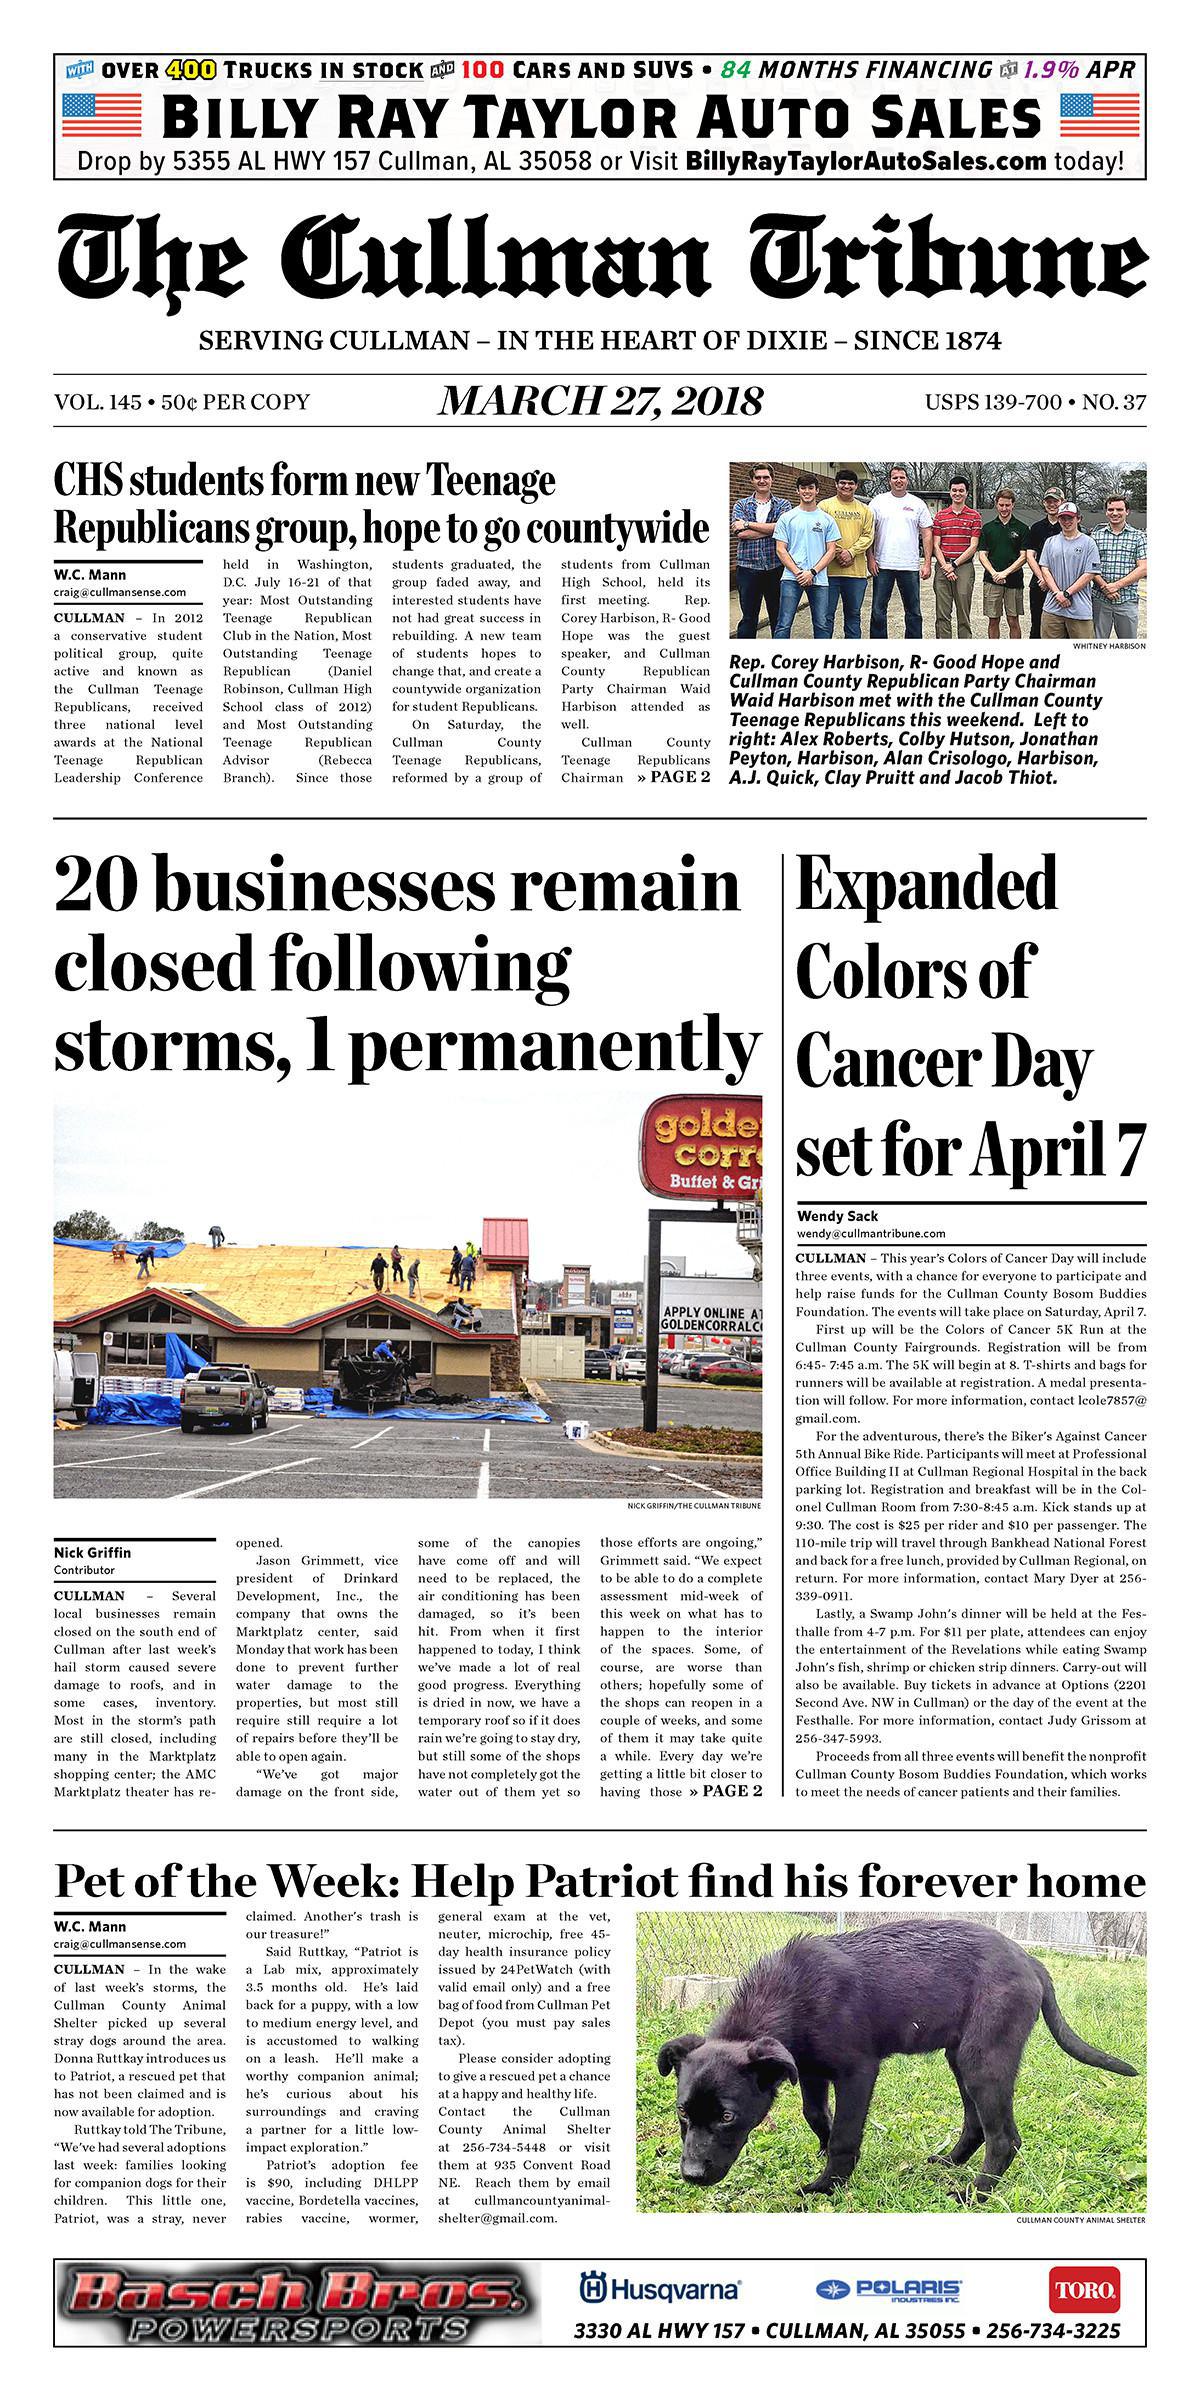 Good Morning Cullman! The 03-27-2018 edition of the Cullman Tribune is now ready to view